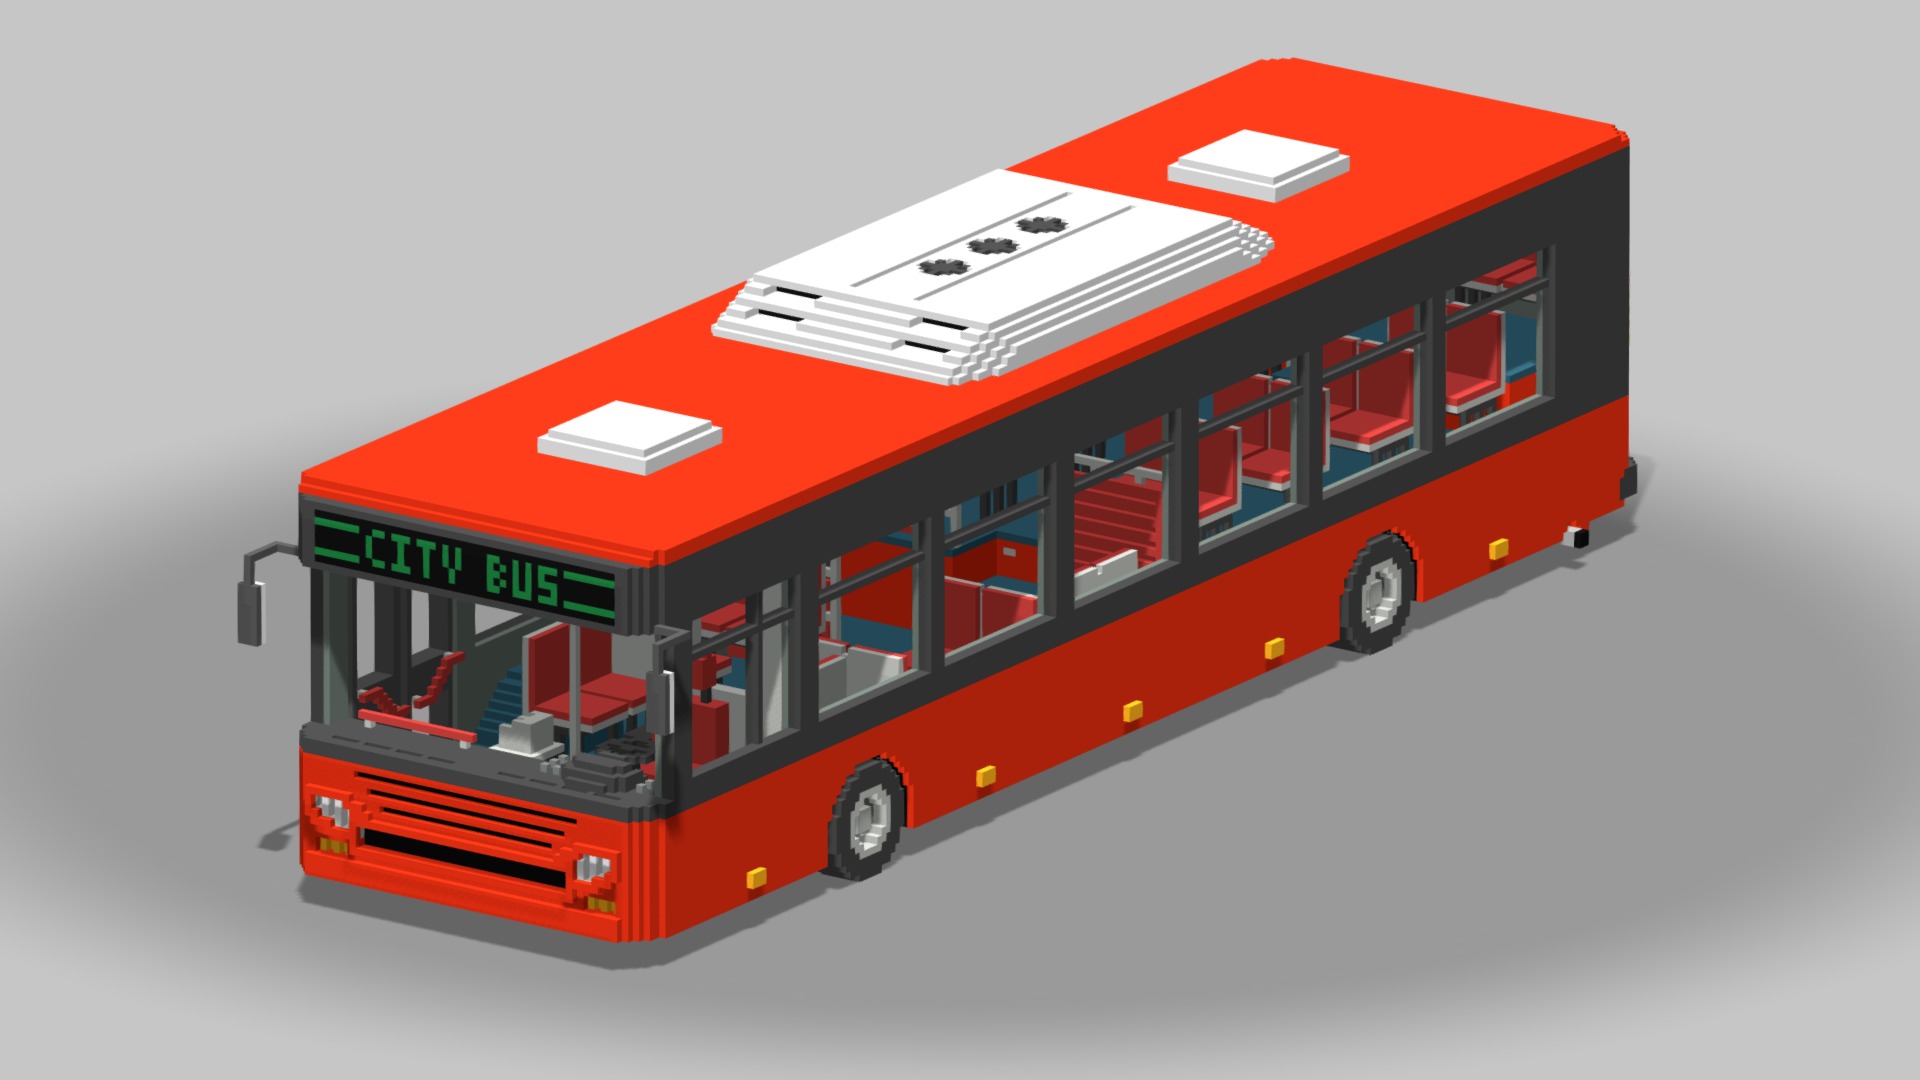 3D model Voxel City Bus - This is a 3D model of the Voxel City Bus. The 3D model is about a red and black bus.